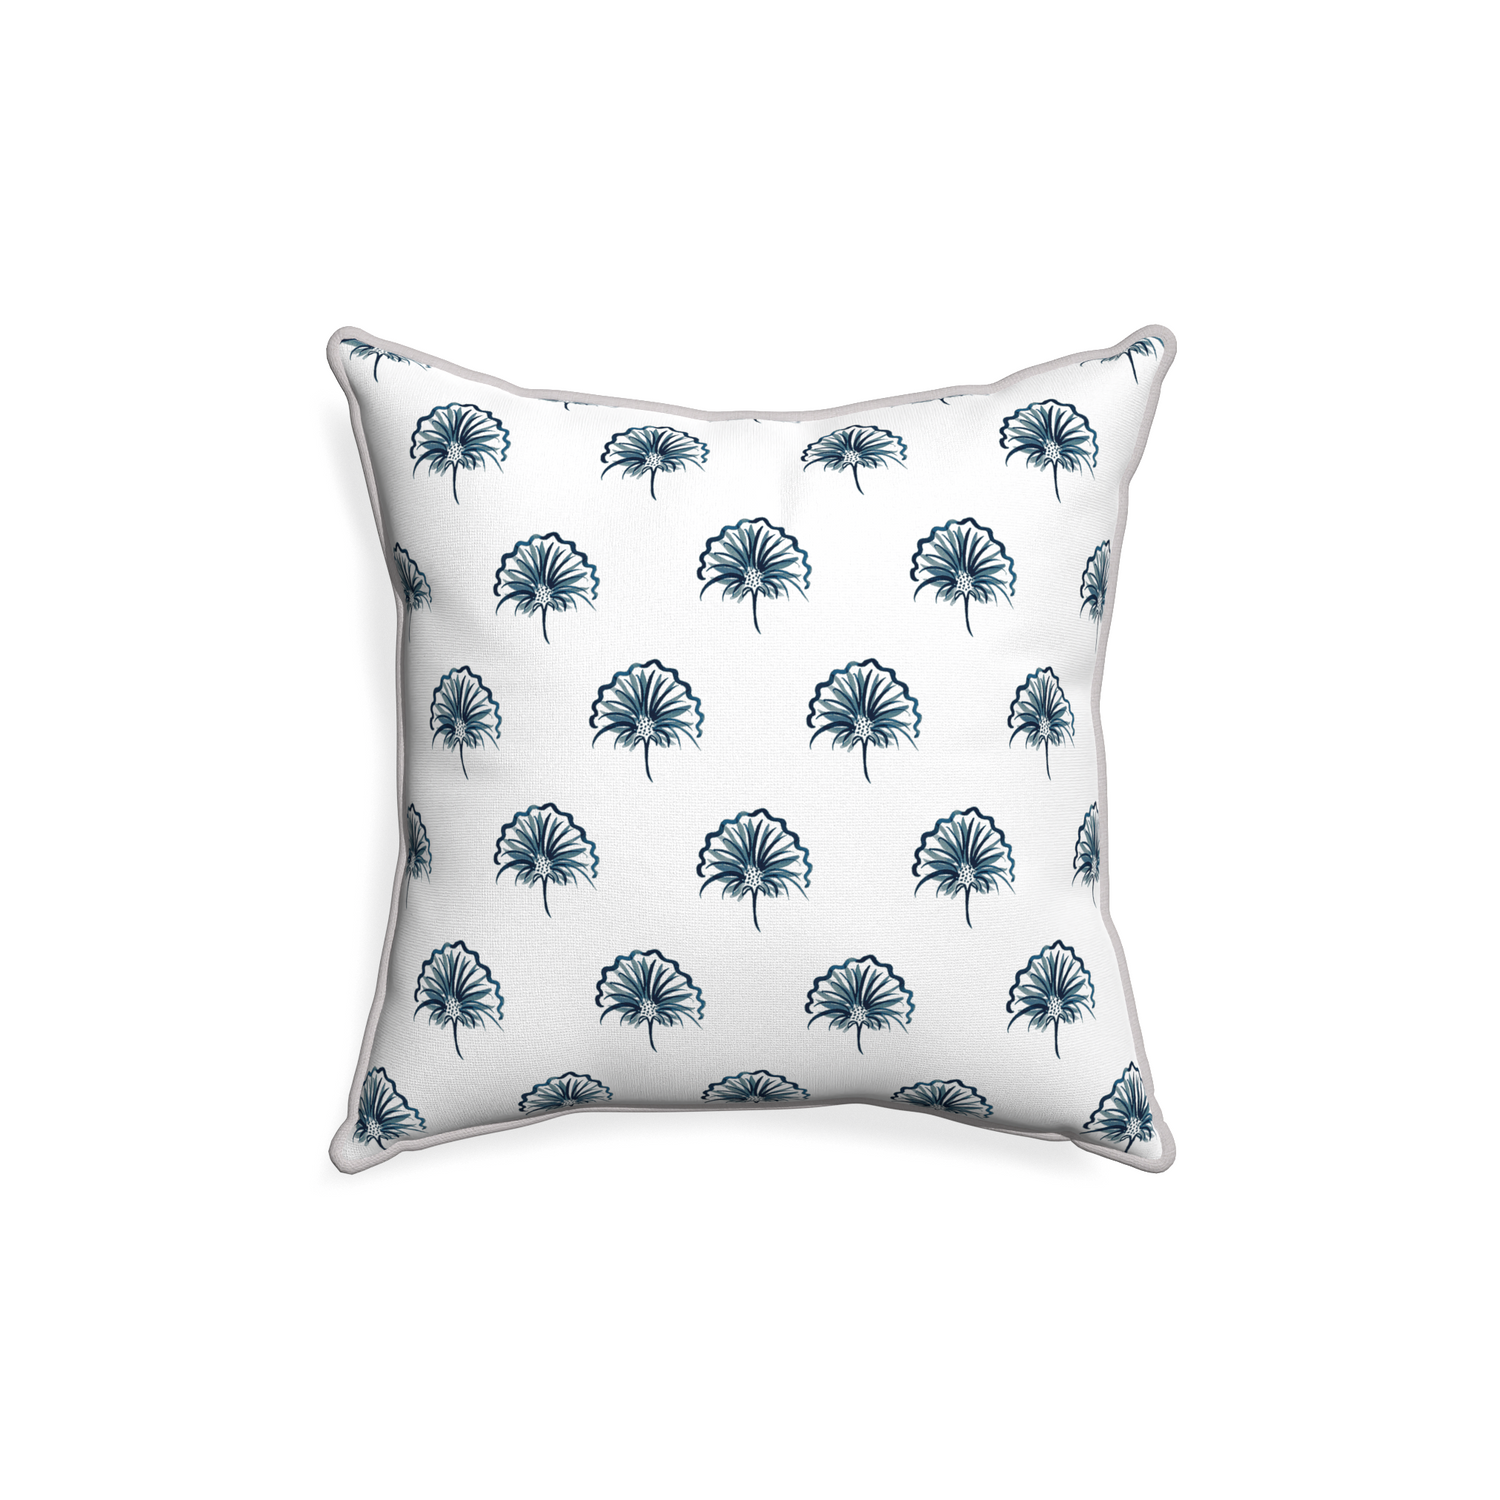 18-square penelope midnight custom pillow with pebble piping on white background